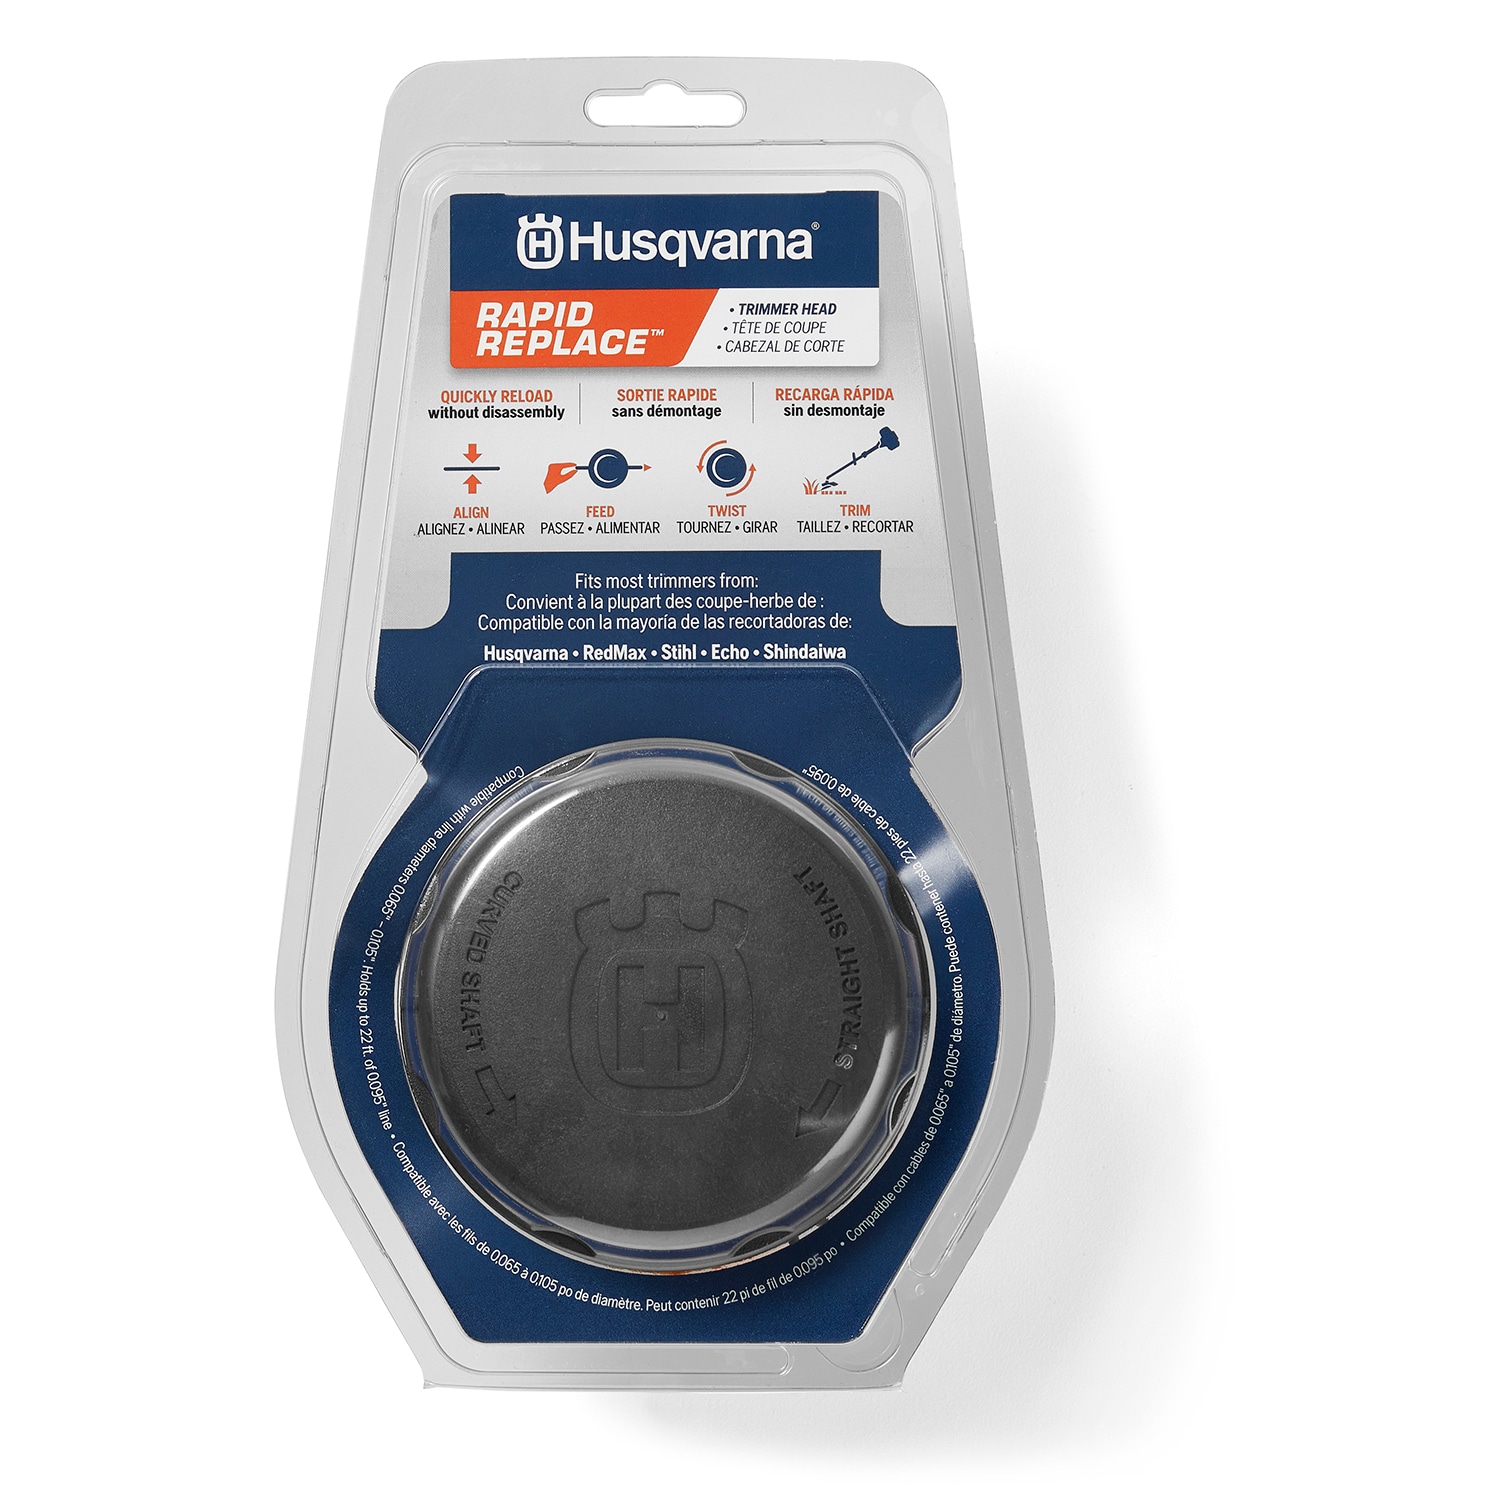 Husqvarna 0.095-in Head in the String Trimmer Heads at Lowes.com